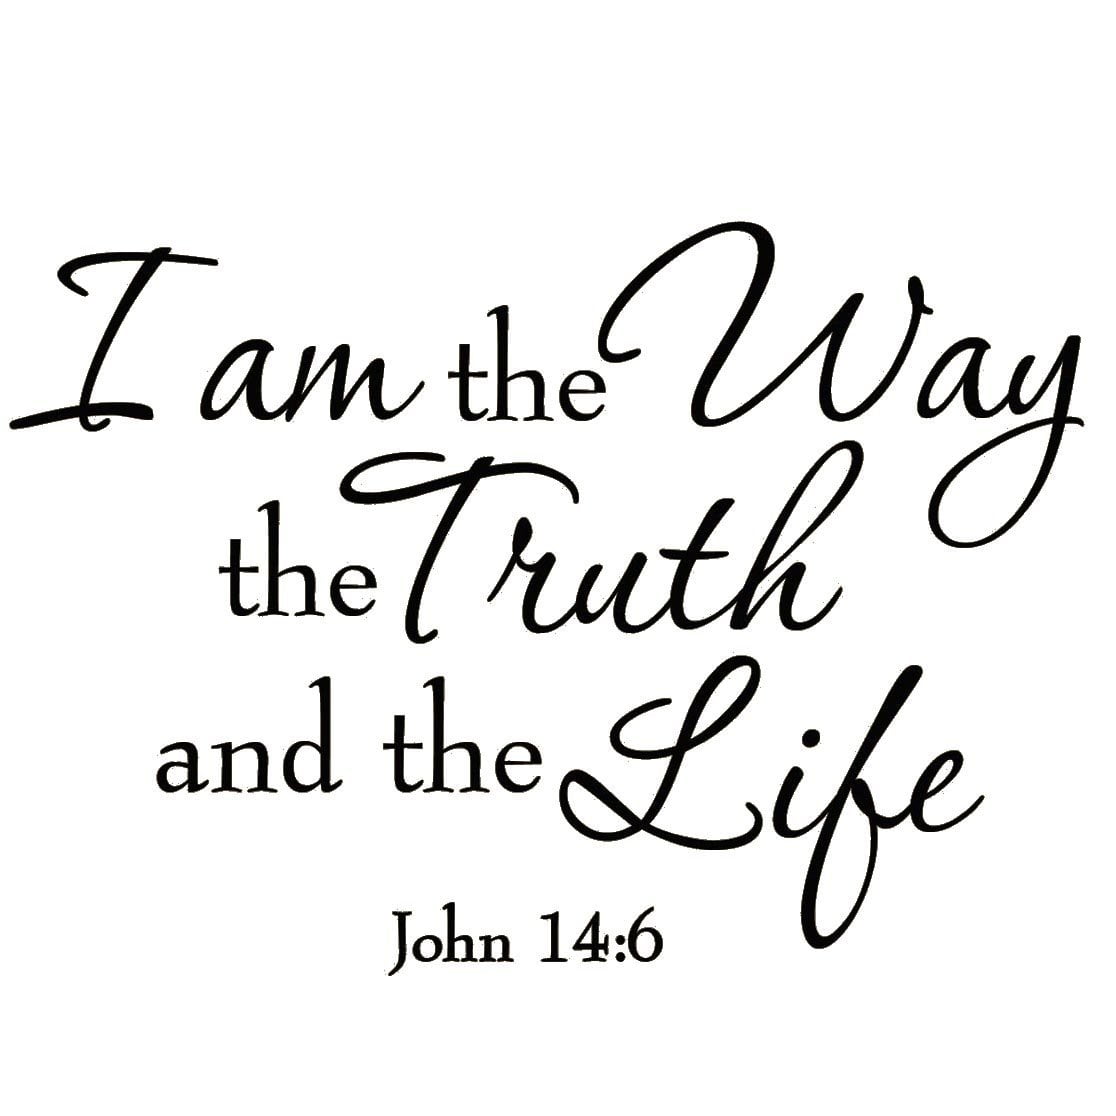 VWAQ I Am the Way the Truth and the Life John 14:6 Bible Wall Art Decal